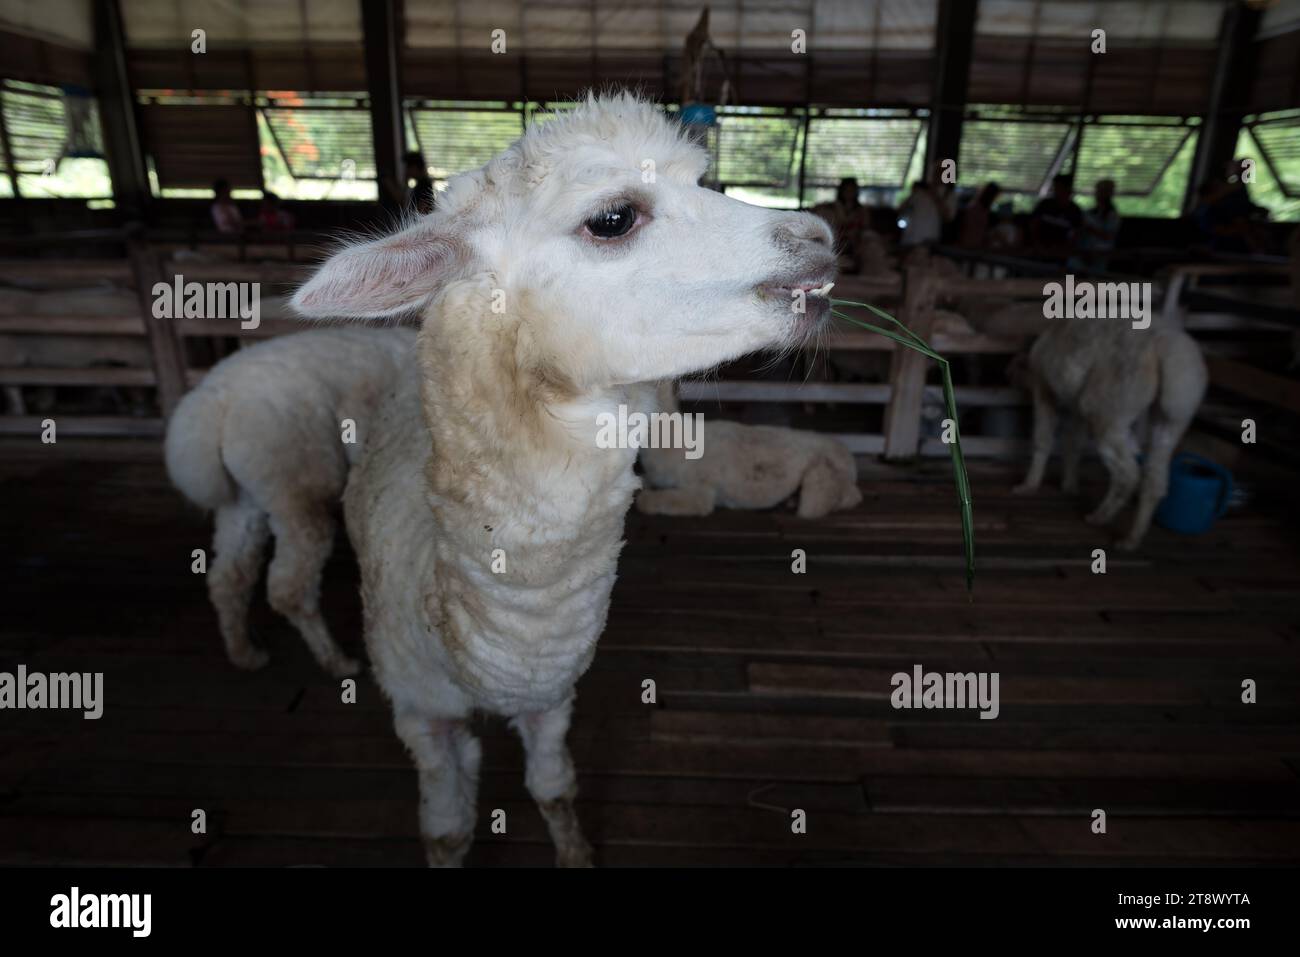 Animal feeding at Primo Piazza, Italian architecture in Khao Yai, Thailand - Primo Piazza is famous for its stunning scenery and elegant Italian archi Stock Photo